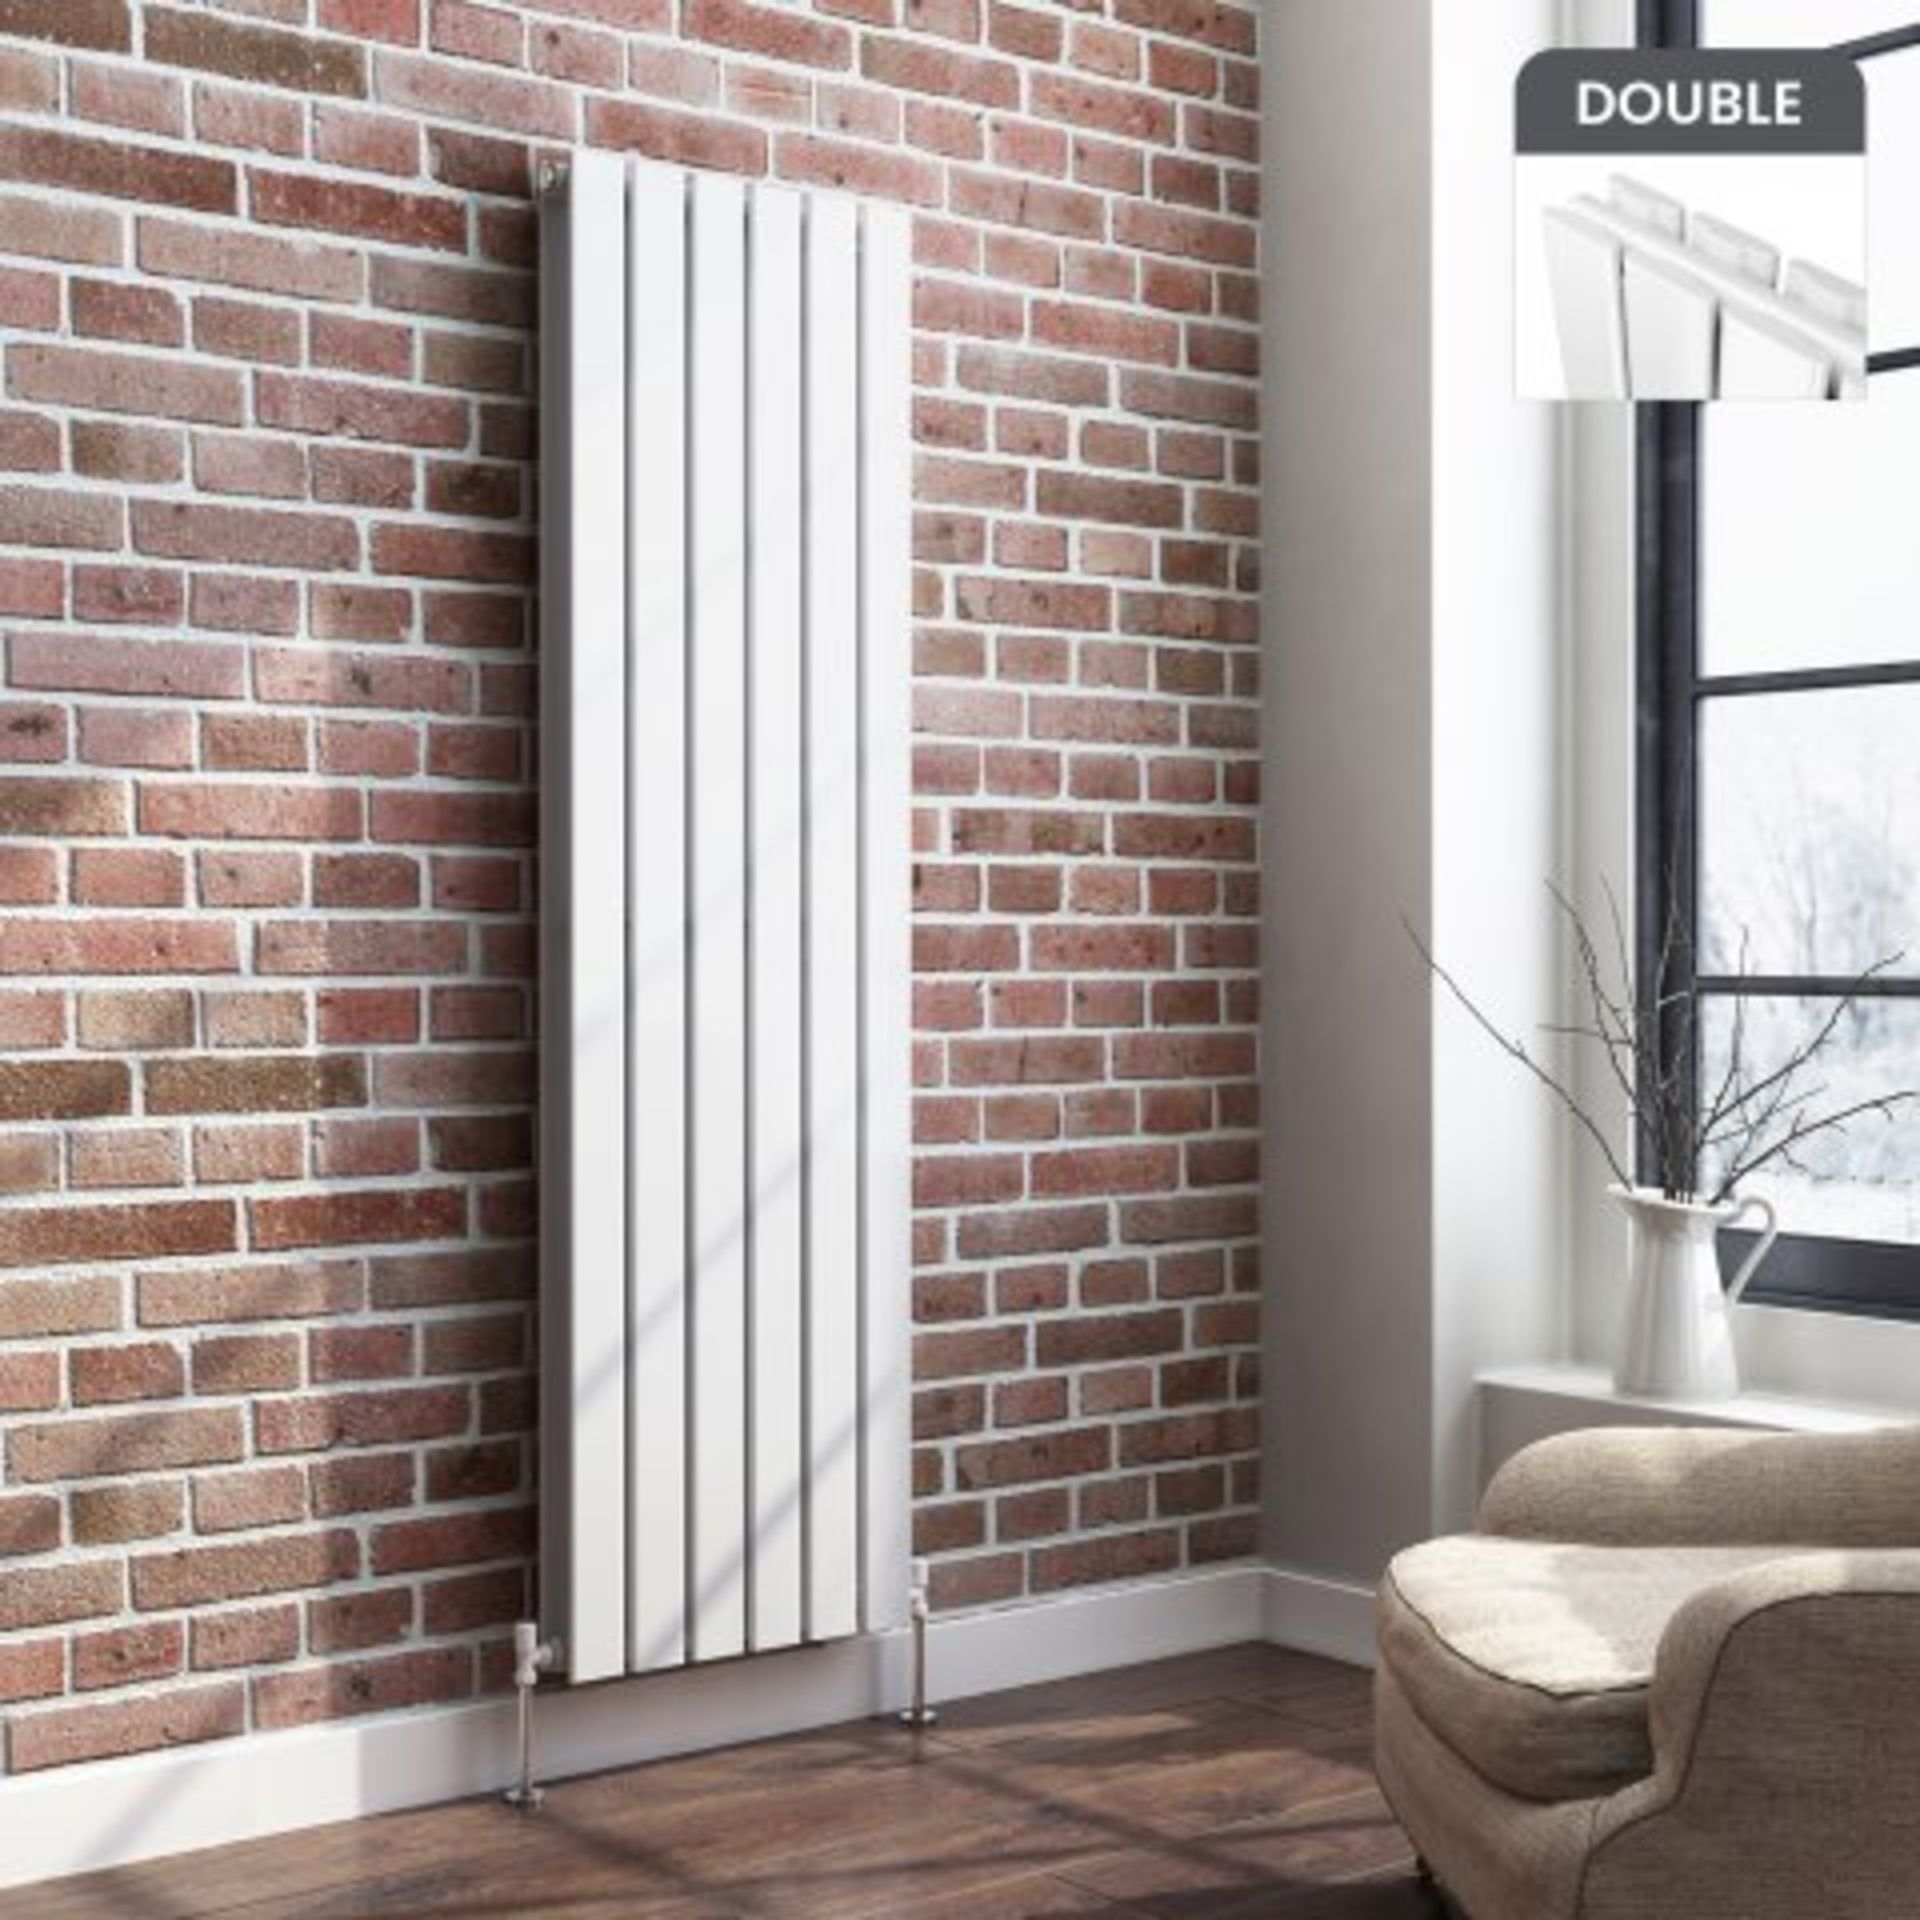 (I8) 1600x452mm Gloss White Double Flat Panel Vertical Radiator RRP £474.99 Attention to detail is - Image 3 of 3